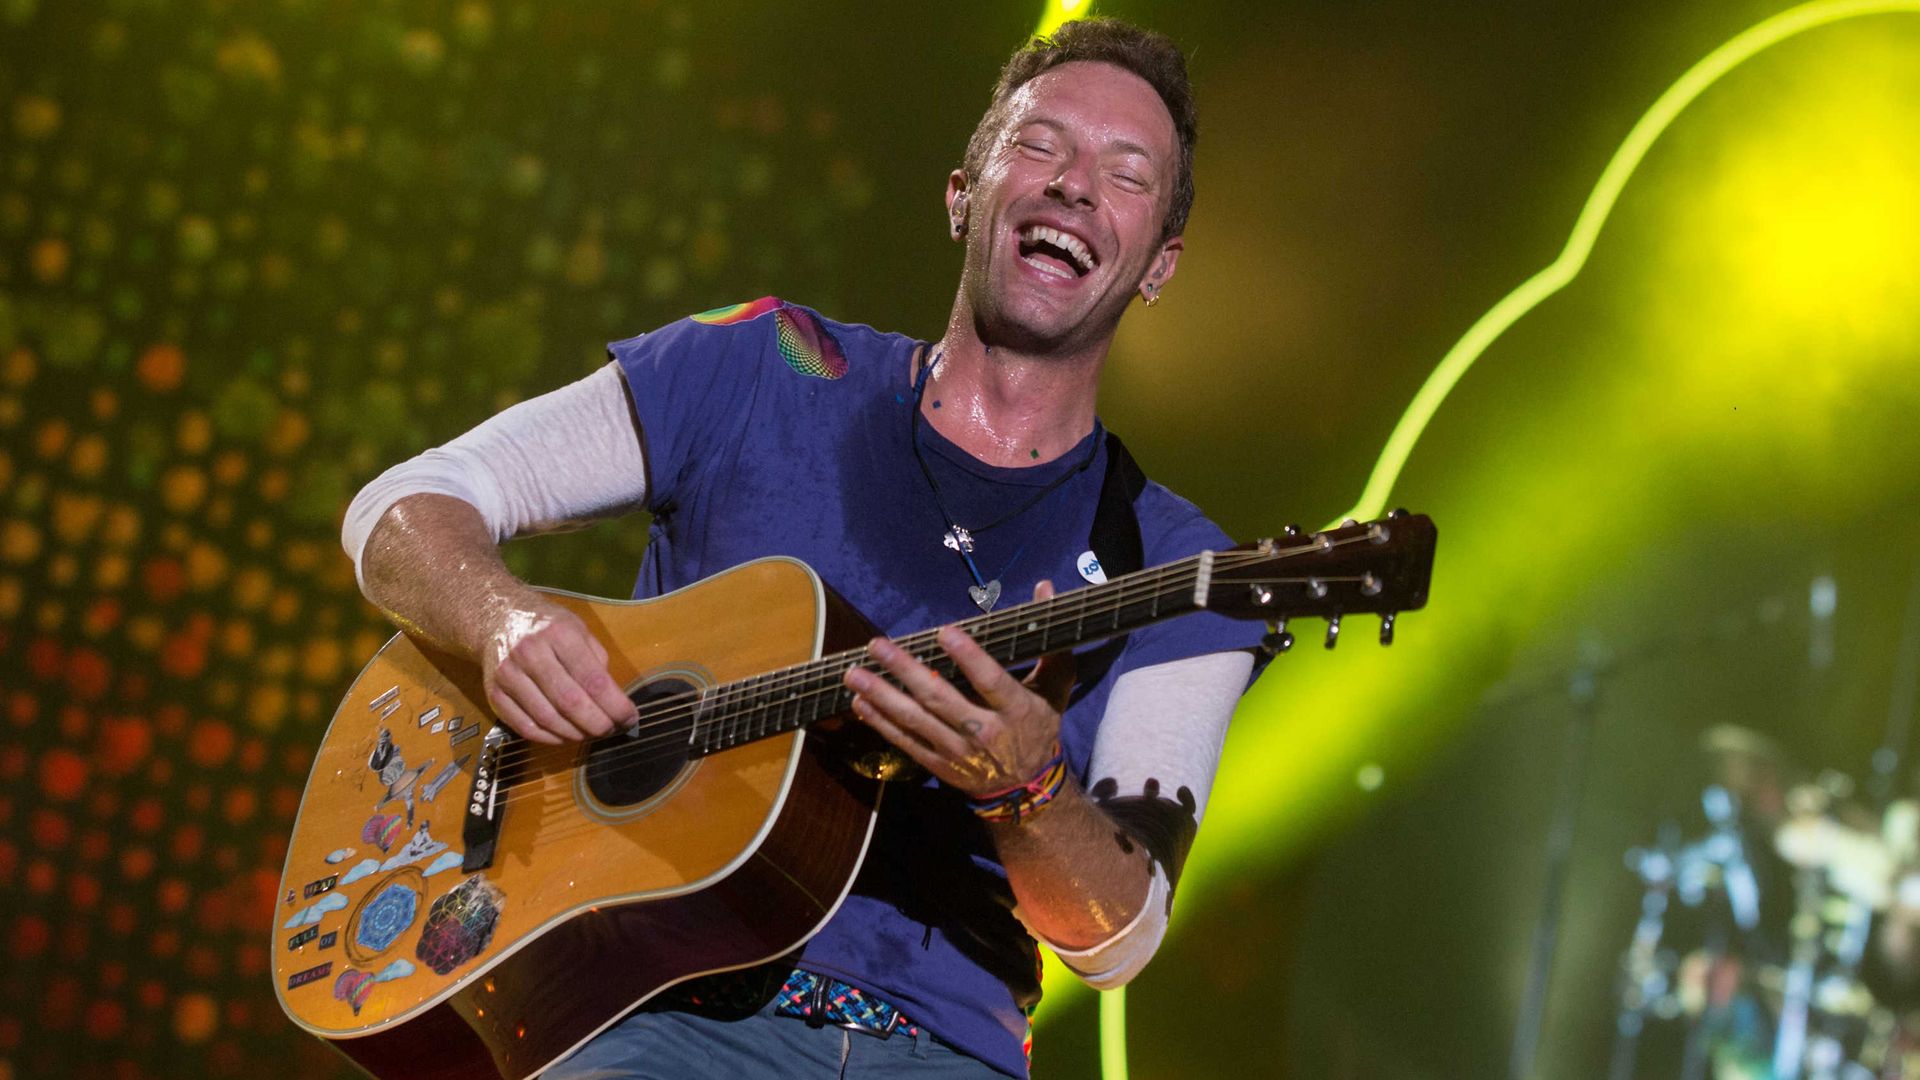 Chris Martin of Coldplay performs in Argentina in 2017